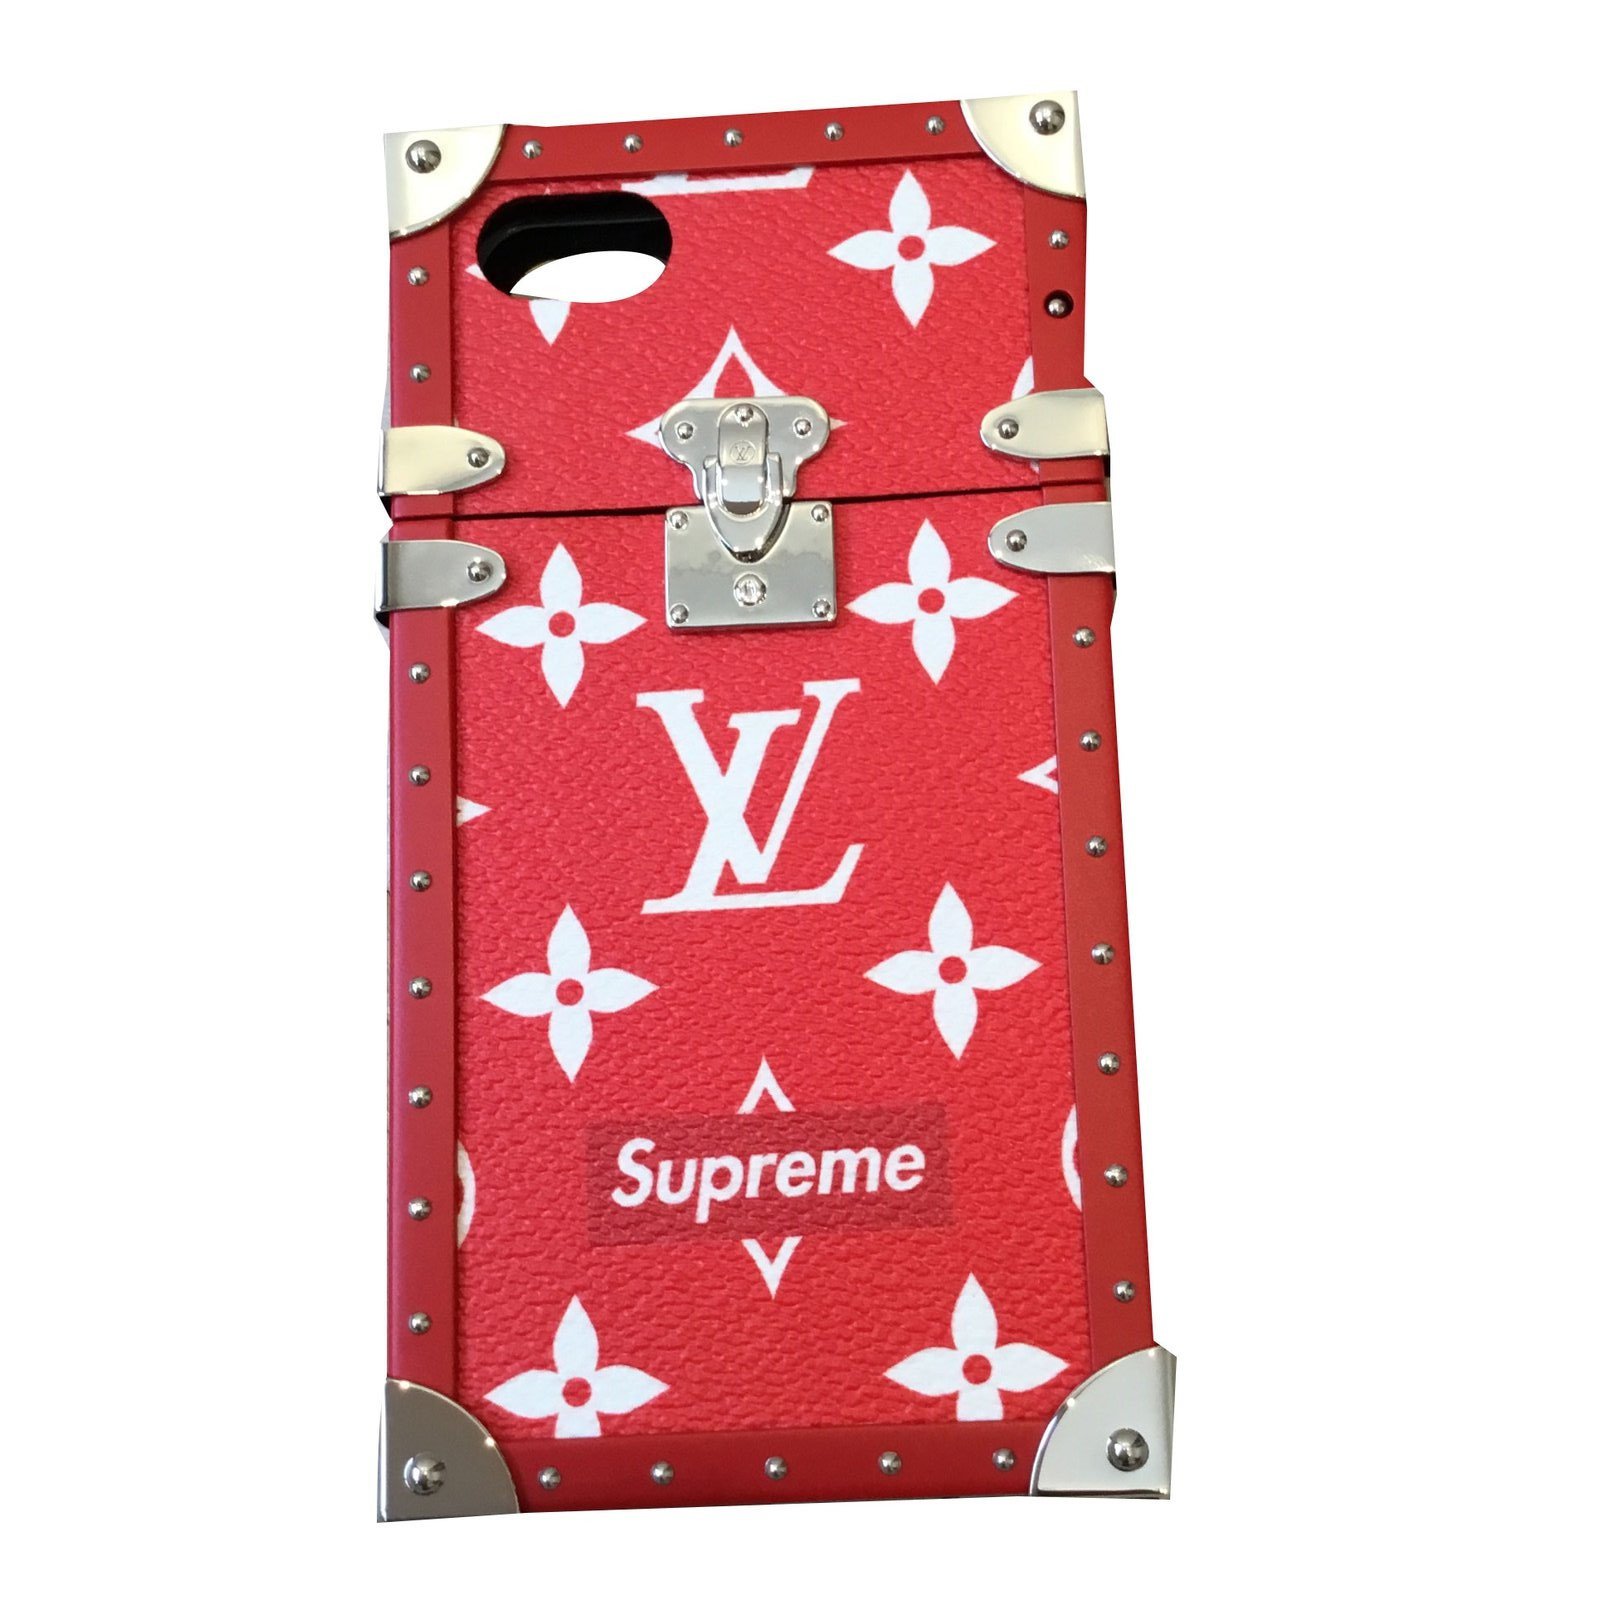 Louis Vuitton X Supreme Red Leather Small Bag, wallets & cases